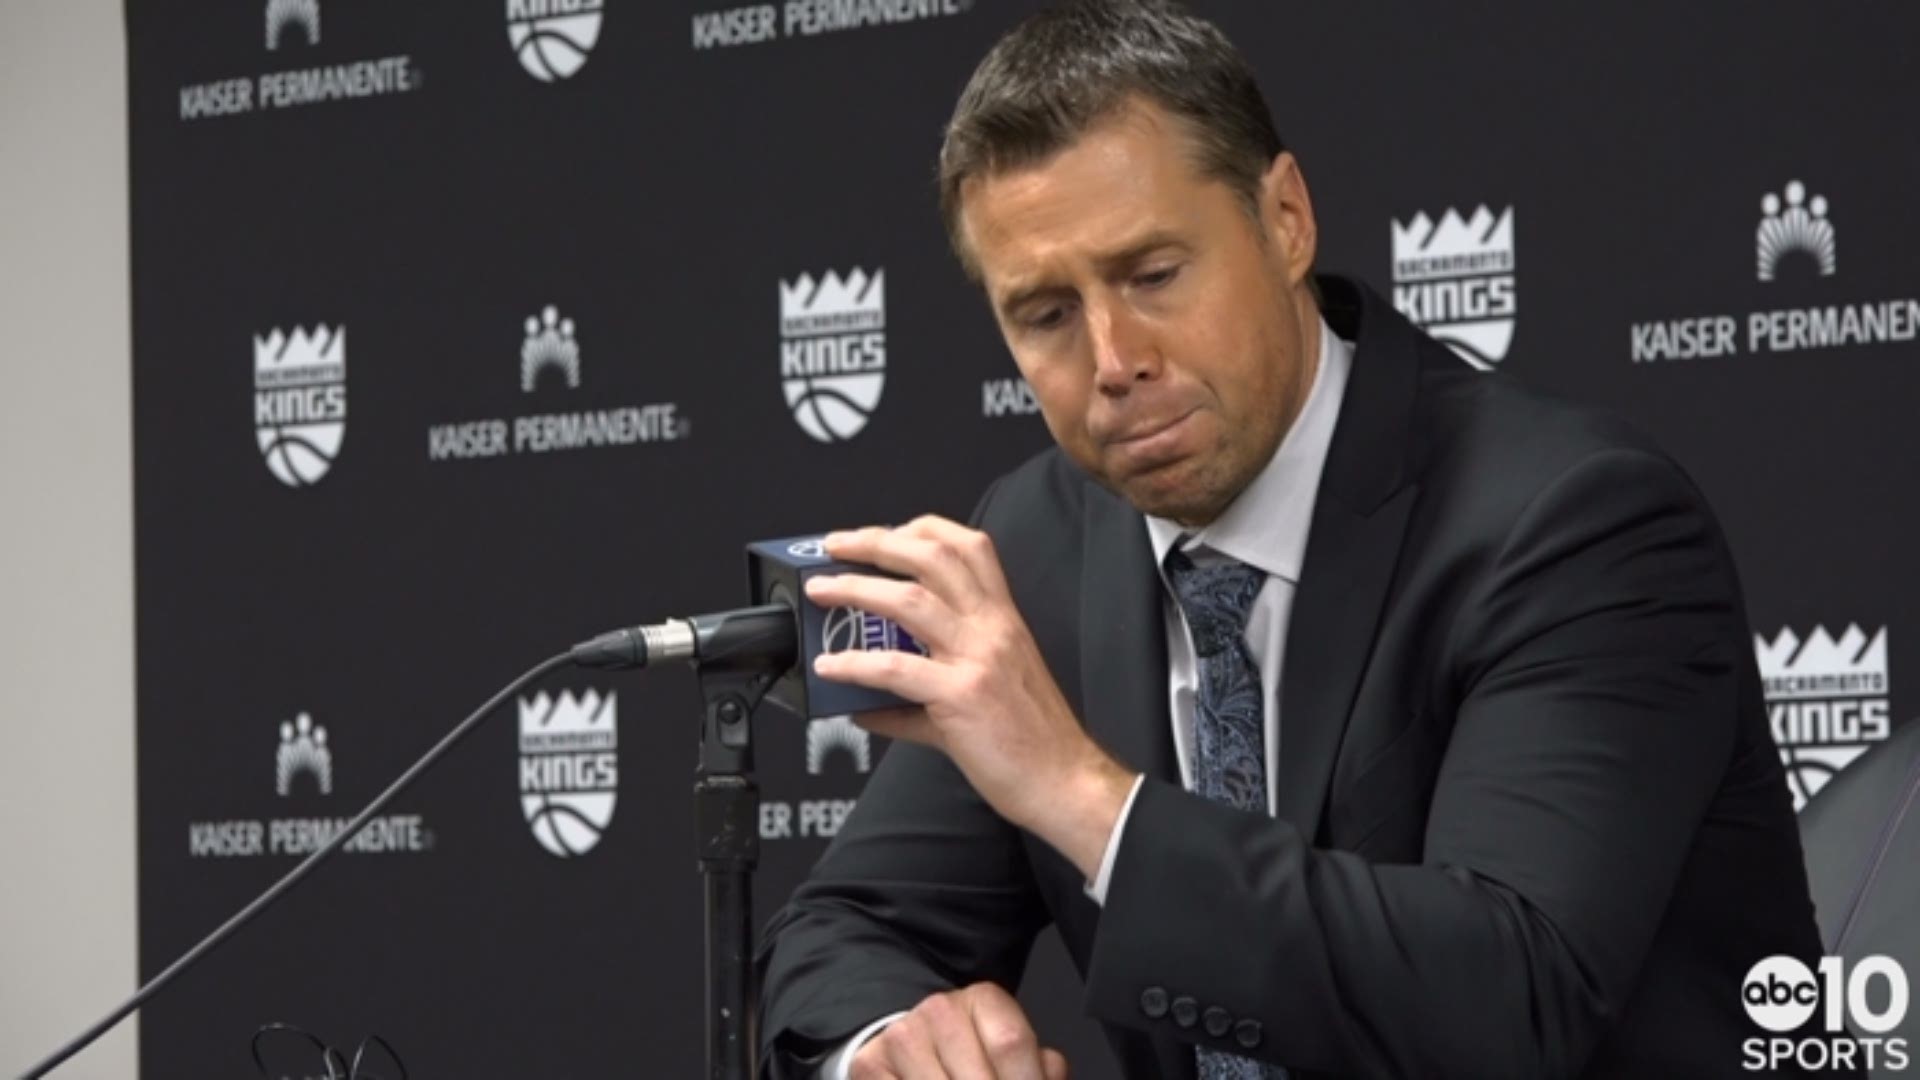 Kings head coach Dave Joerger talks about his team's effort in the season opening loss to the Utah Jazz, after losing to them by 39 last week in an exhibition game in Sacramento. Joerger talks about the offensive output from Willie Cauley-Stein and the debut of rookies Harry Giles and Marvin Bagley III.